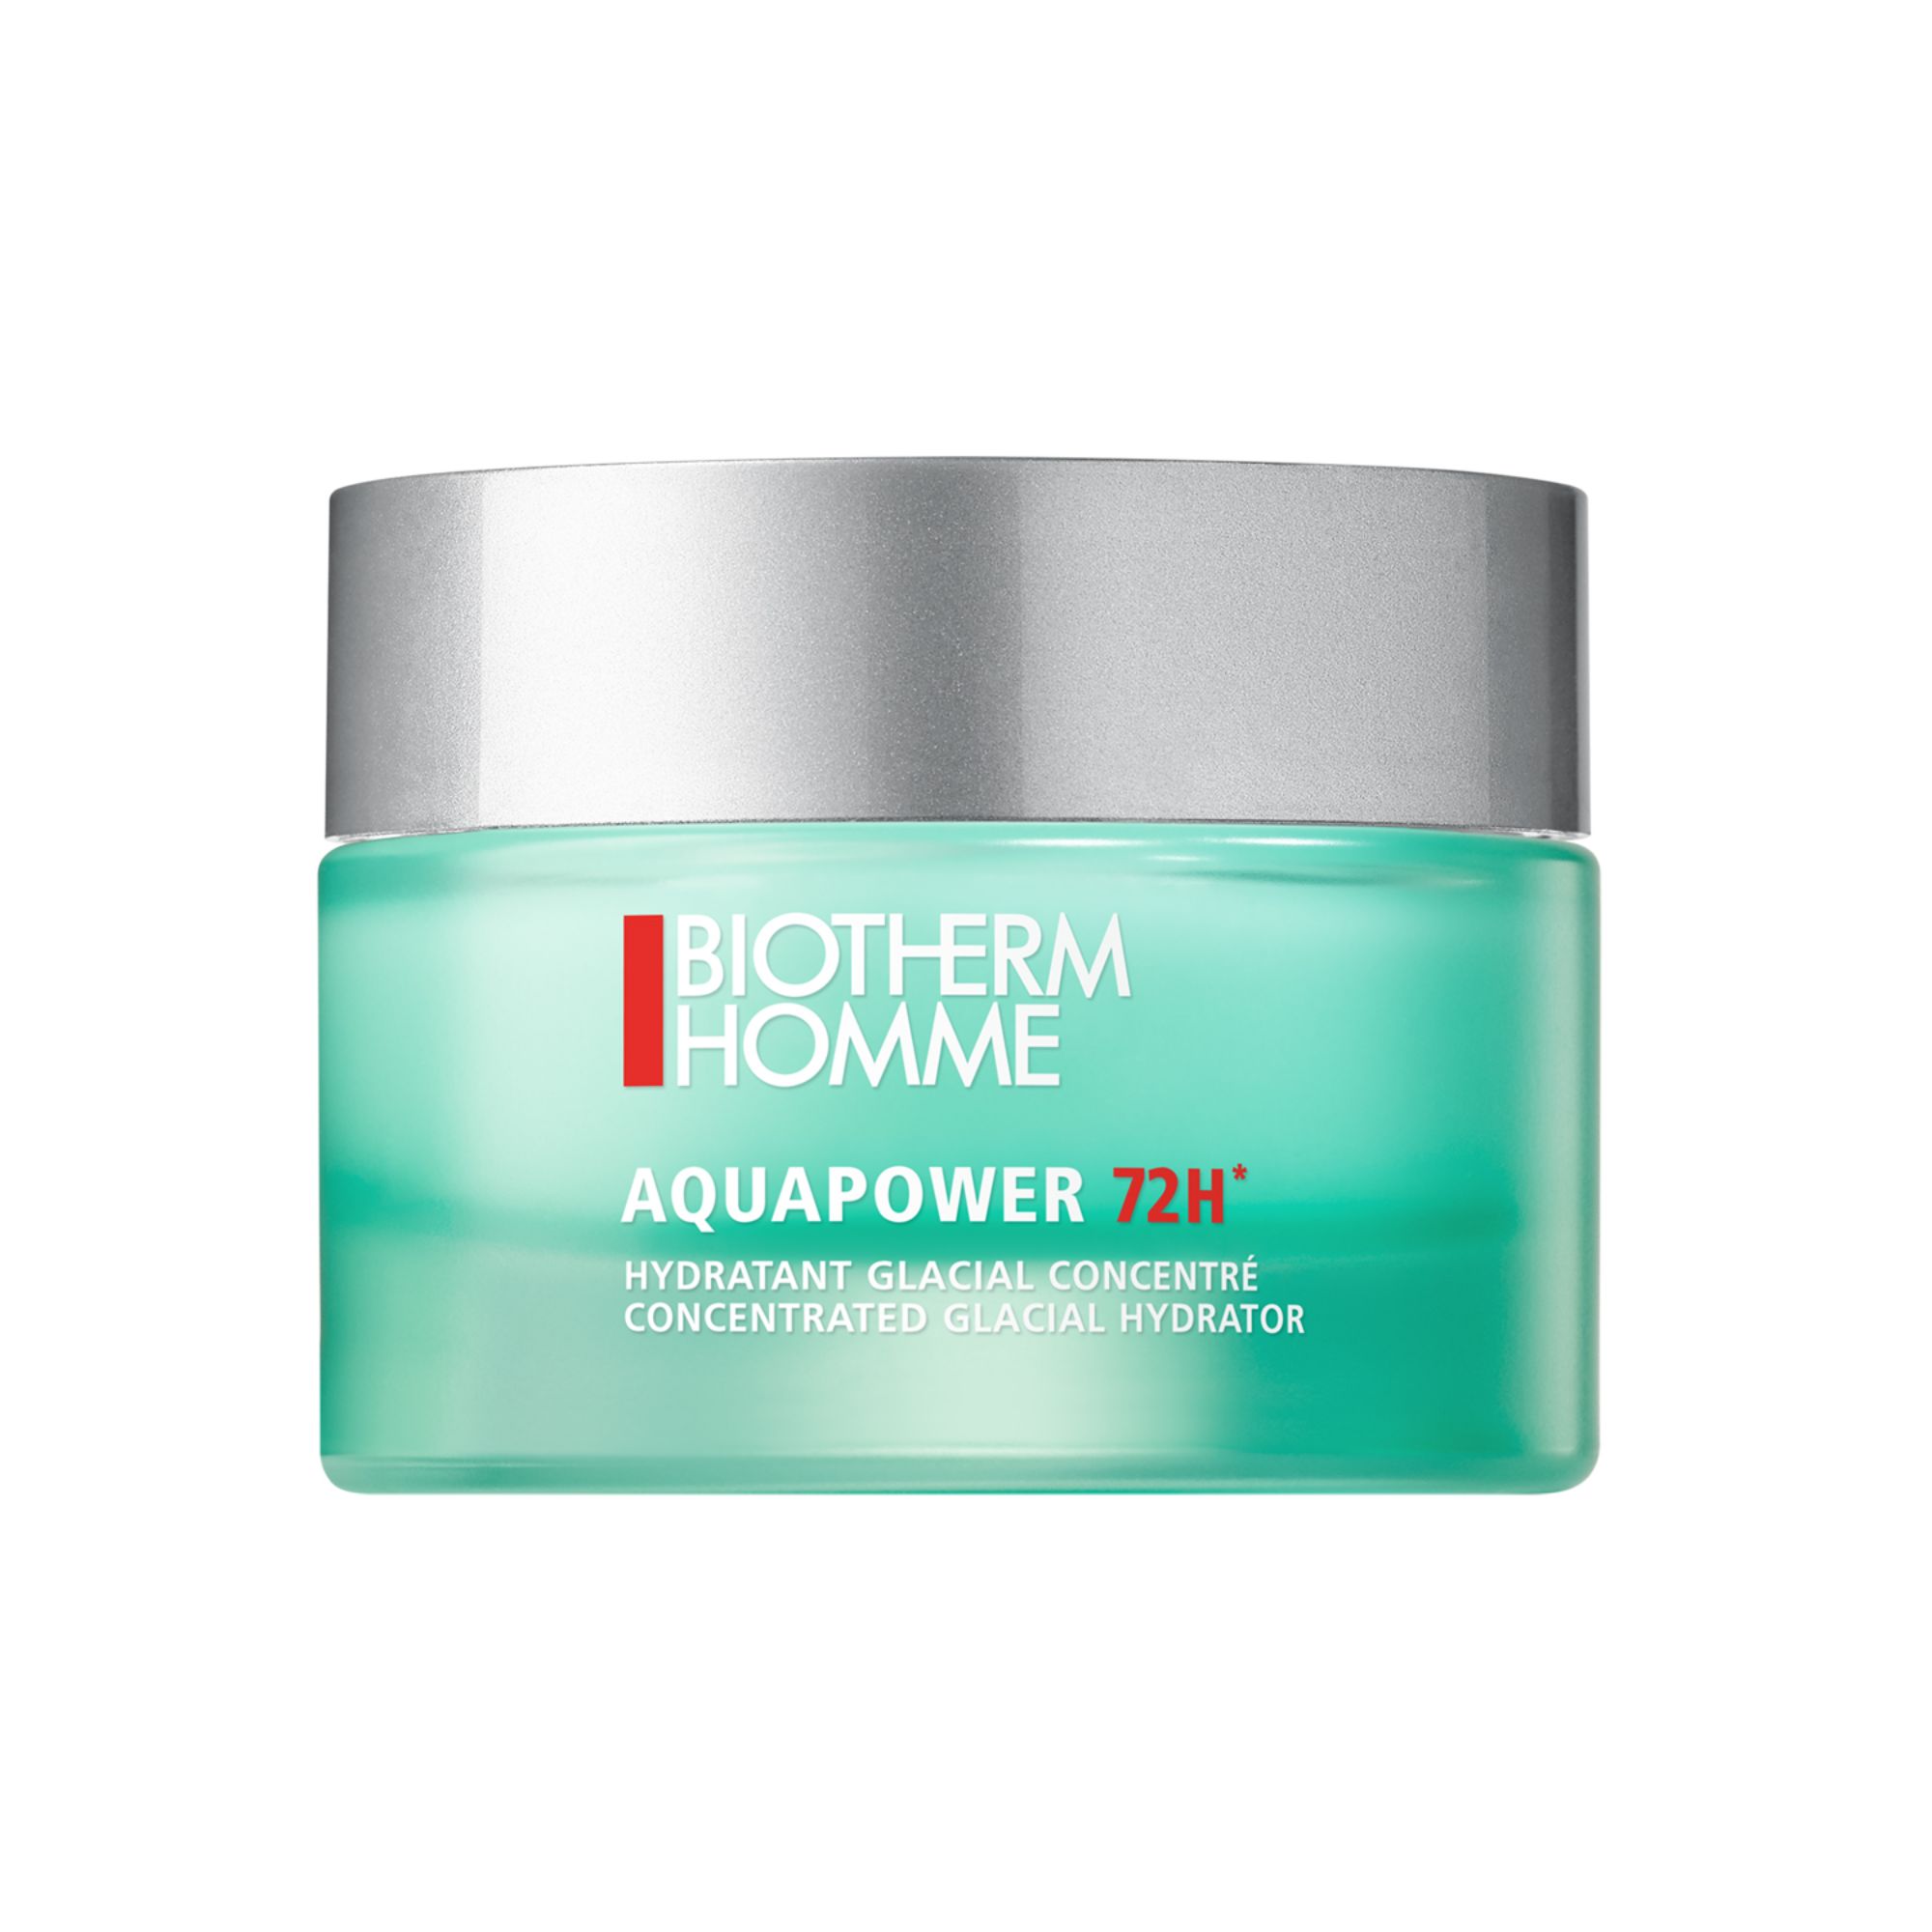  Homme Aquapower 72H Concentrated Glacial Hydrator